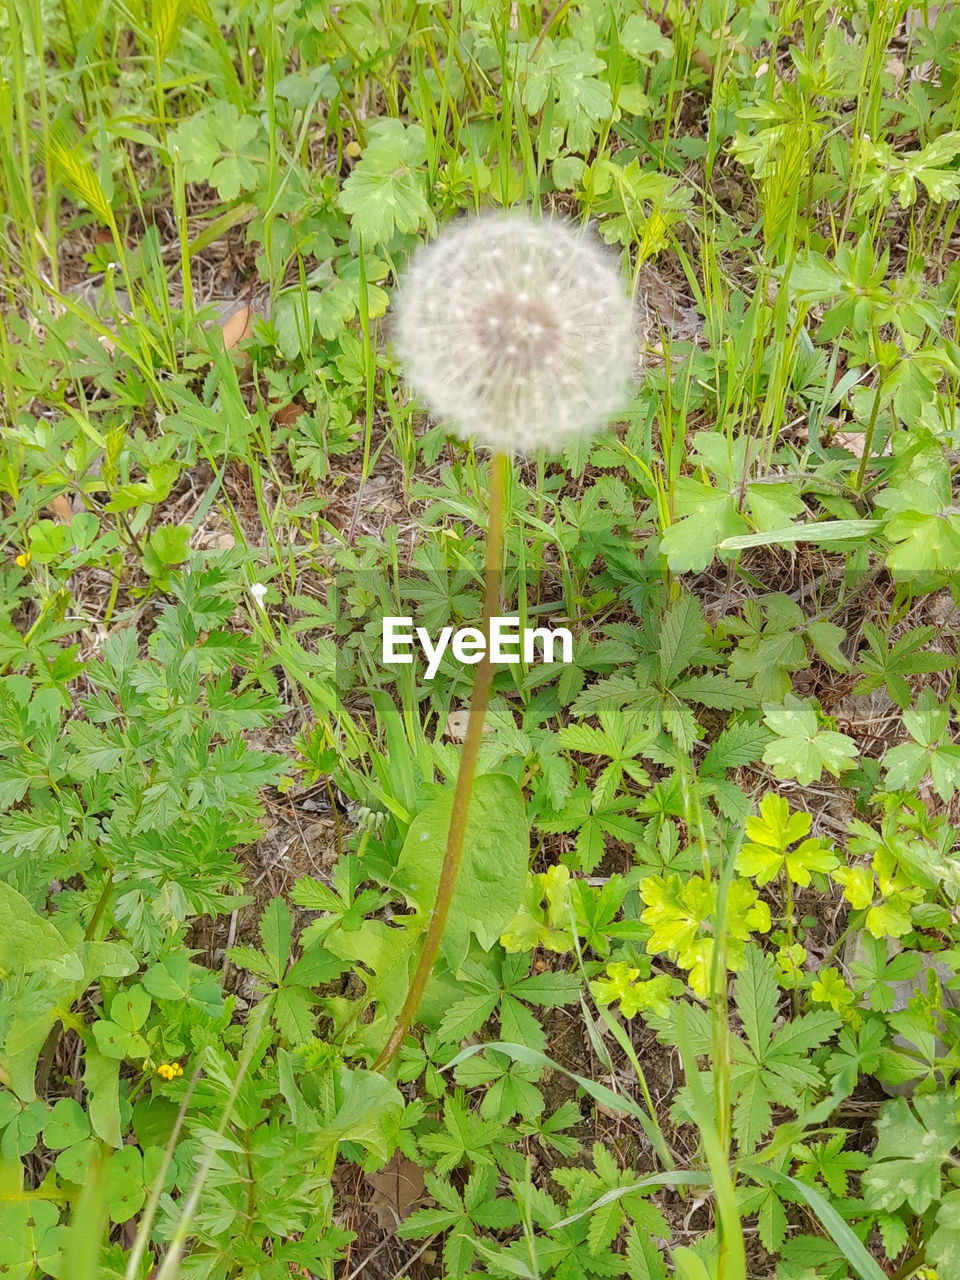 plant, growth, green, nature, land, field, beauty in nature, day, grass, high angle view, no people, flower, freshness, fragility, leaf, flowering plant, dandelion, plant part, woodland, outdoors, fungus, close-up, tranquility, mushroom, meadow, wildflower